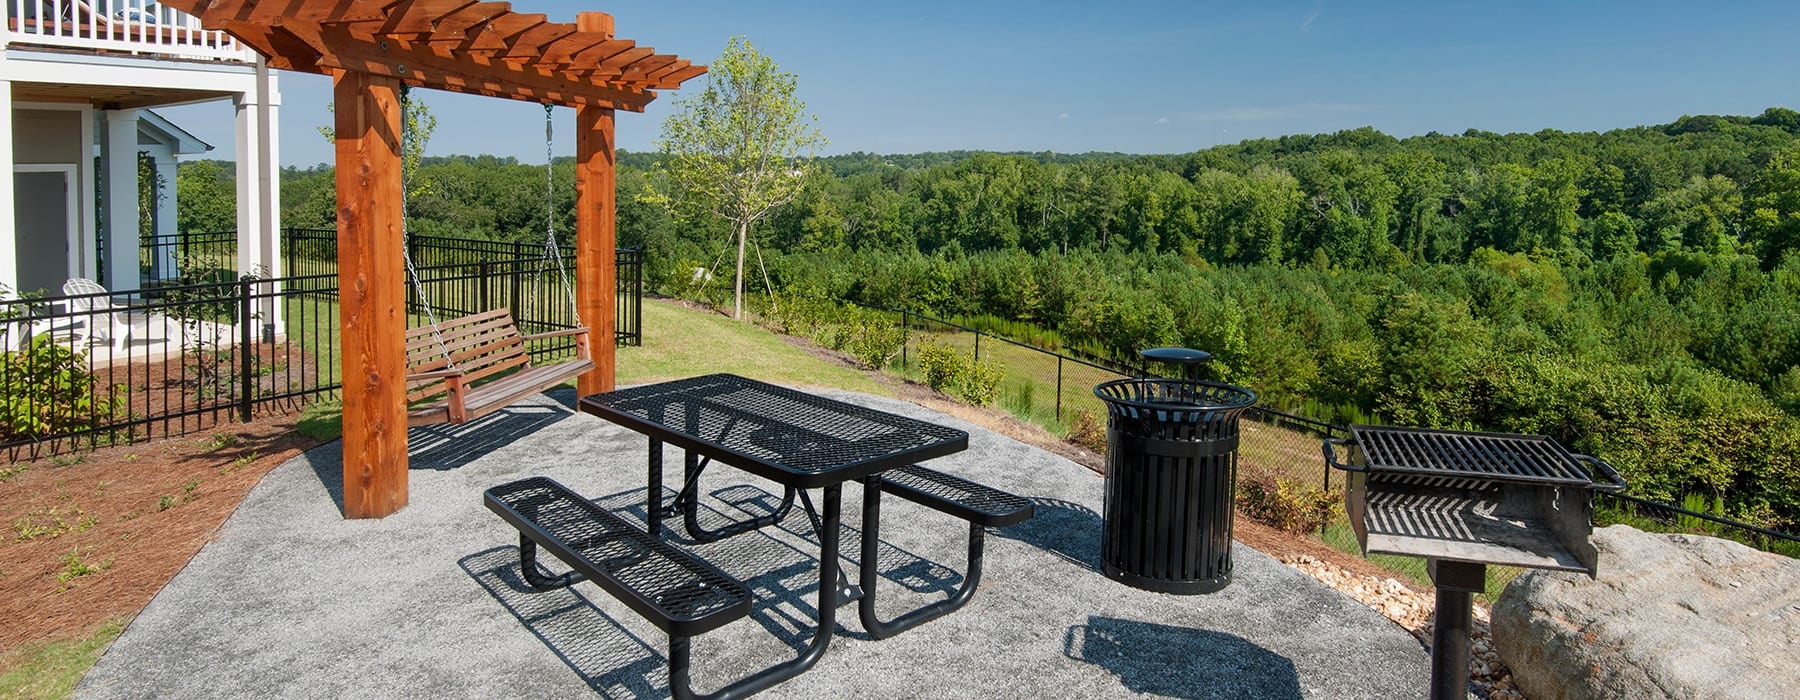 overlook area with a wooden bench swing and with views of near forest